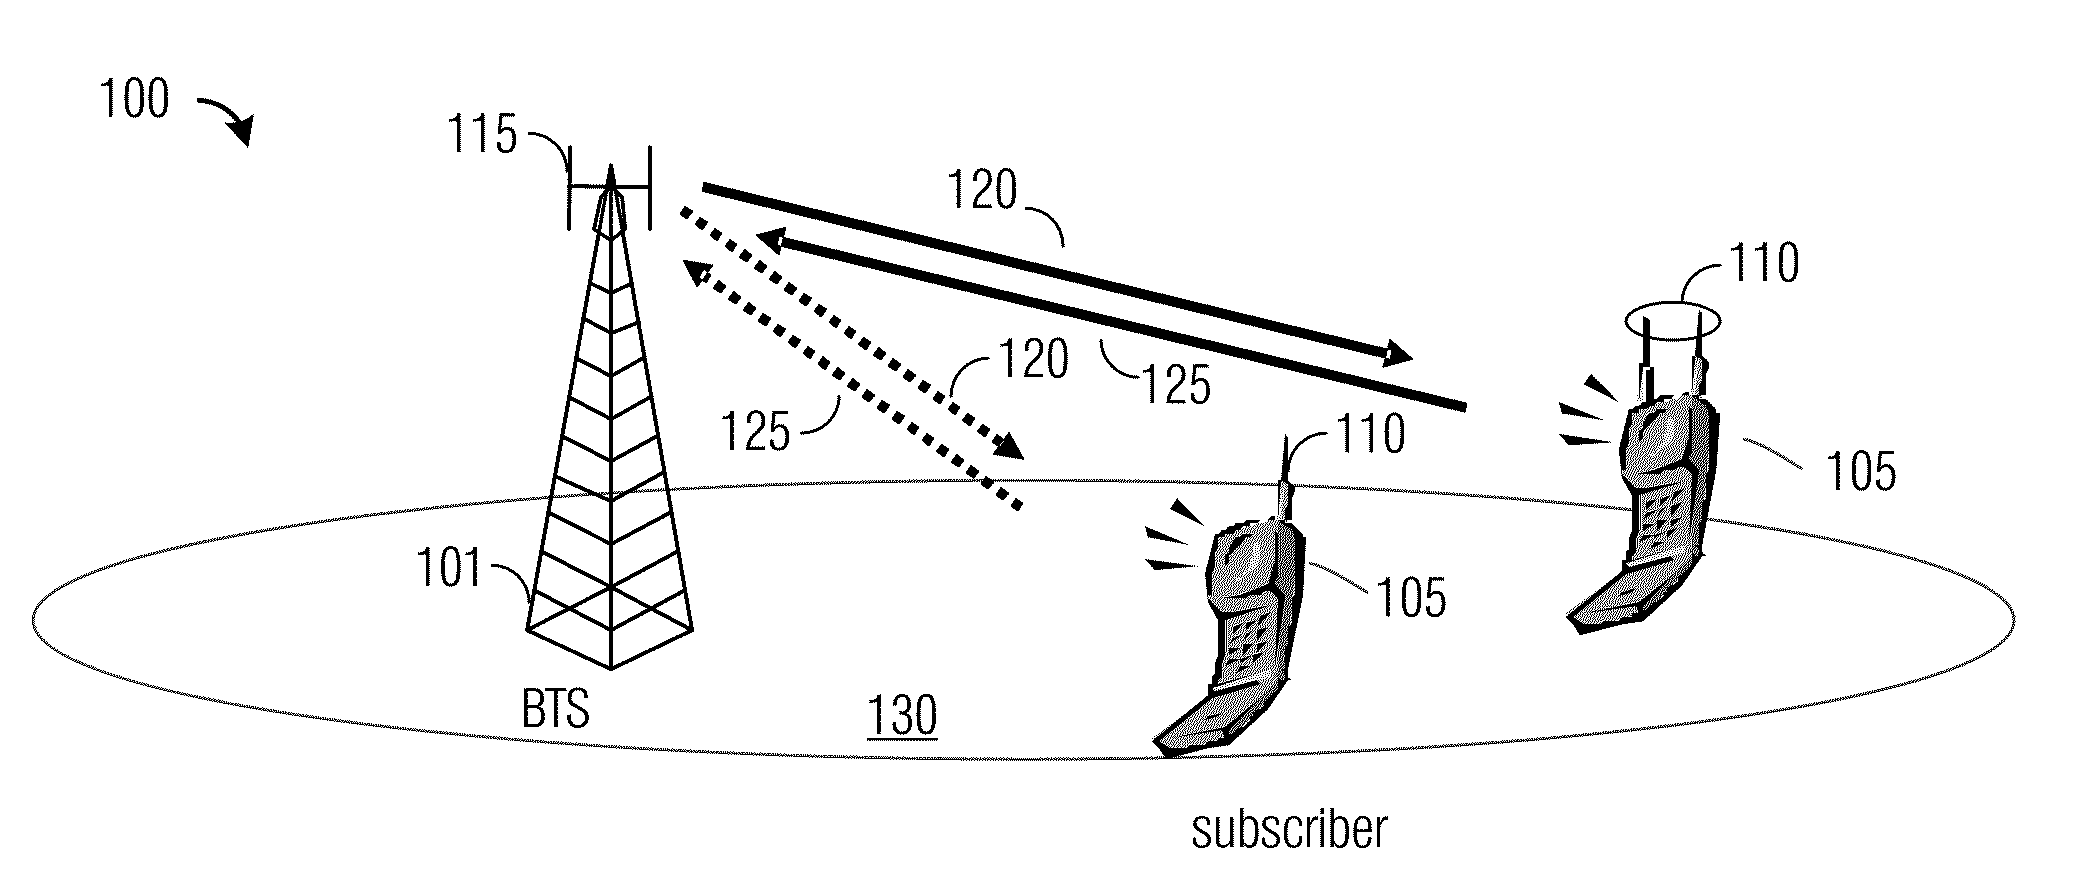 System and Method for Wireless Communications